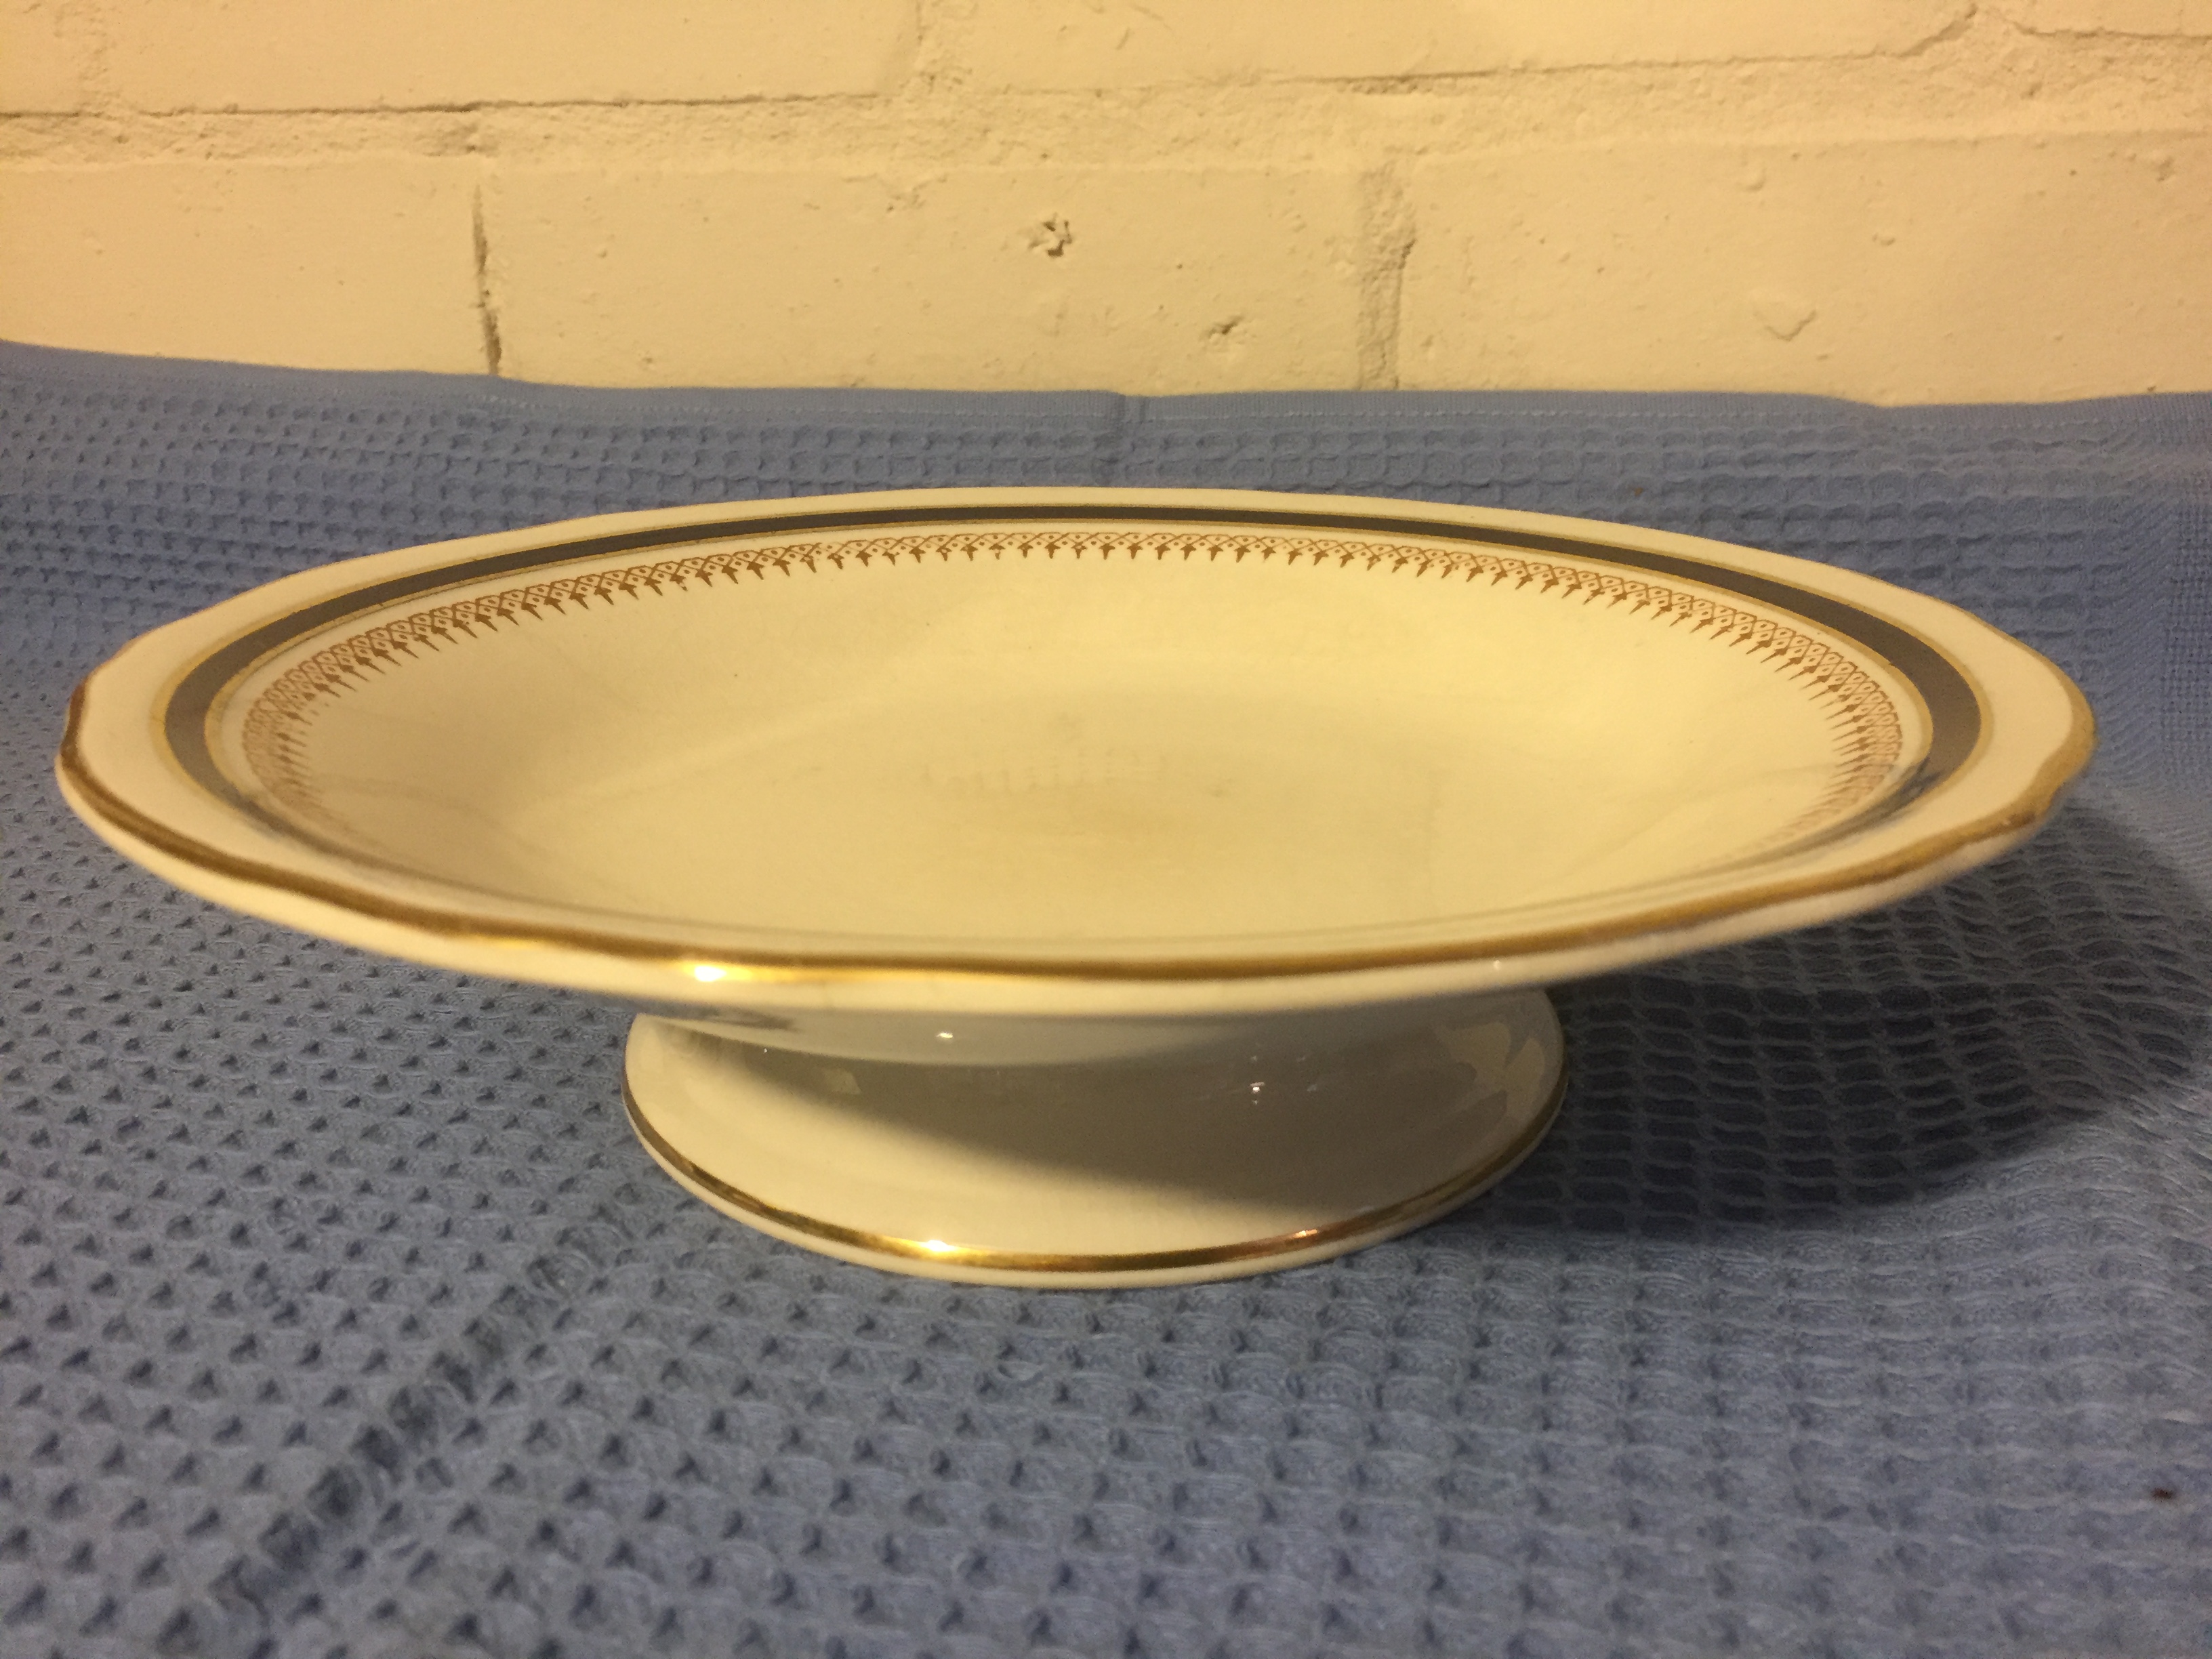 TURN OF THE CENTURY UNION CASTLE LINE FRUIT BOWL/STAND FROM THE EARLY 1900's